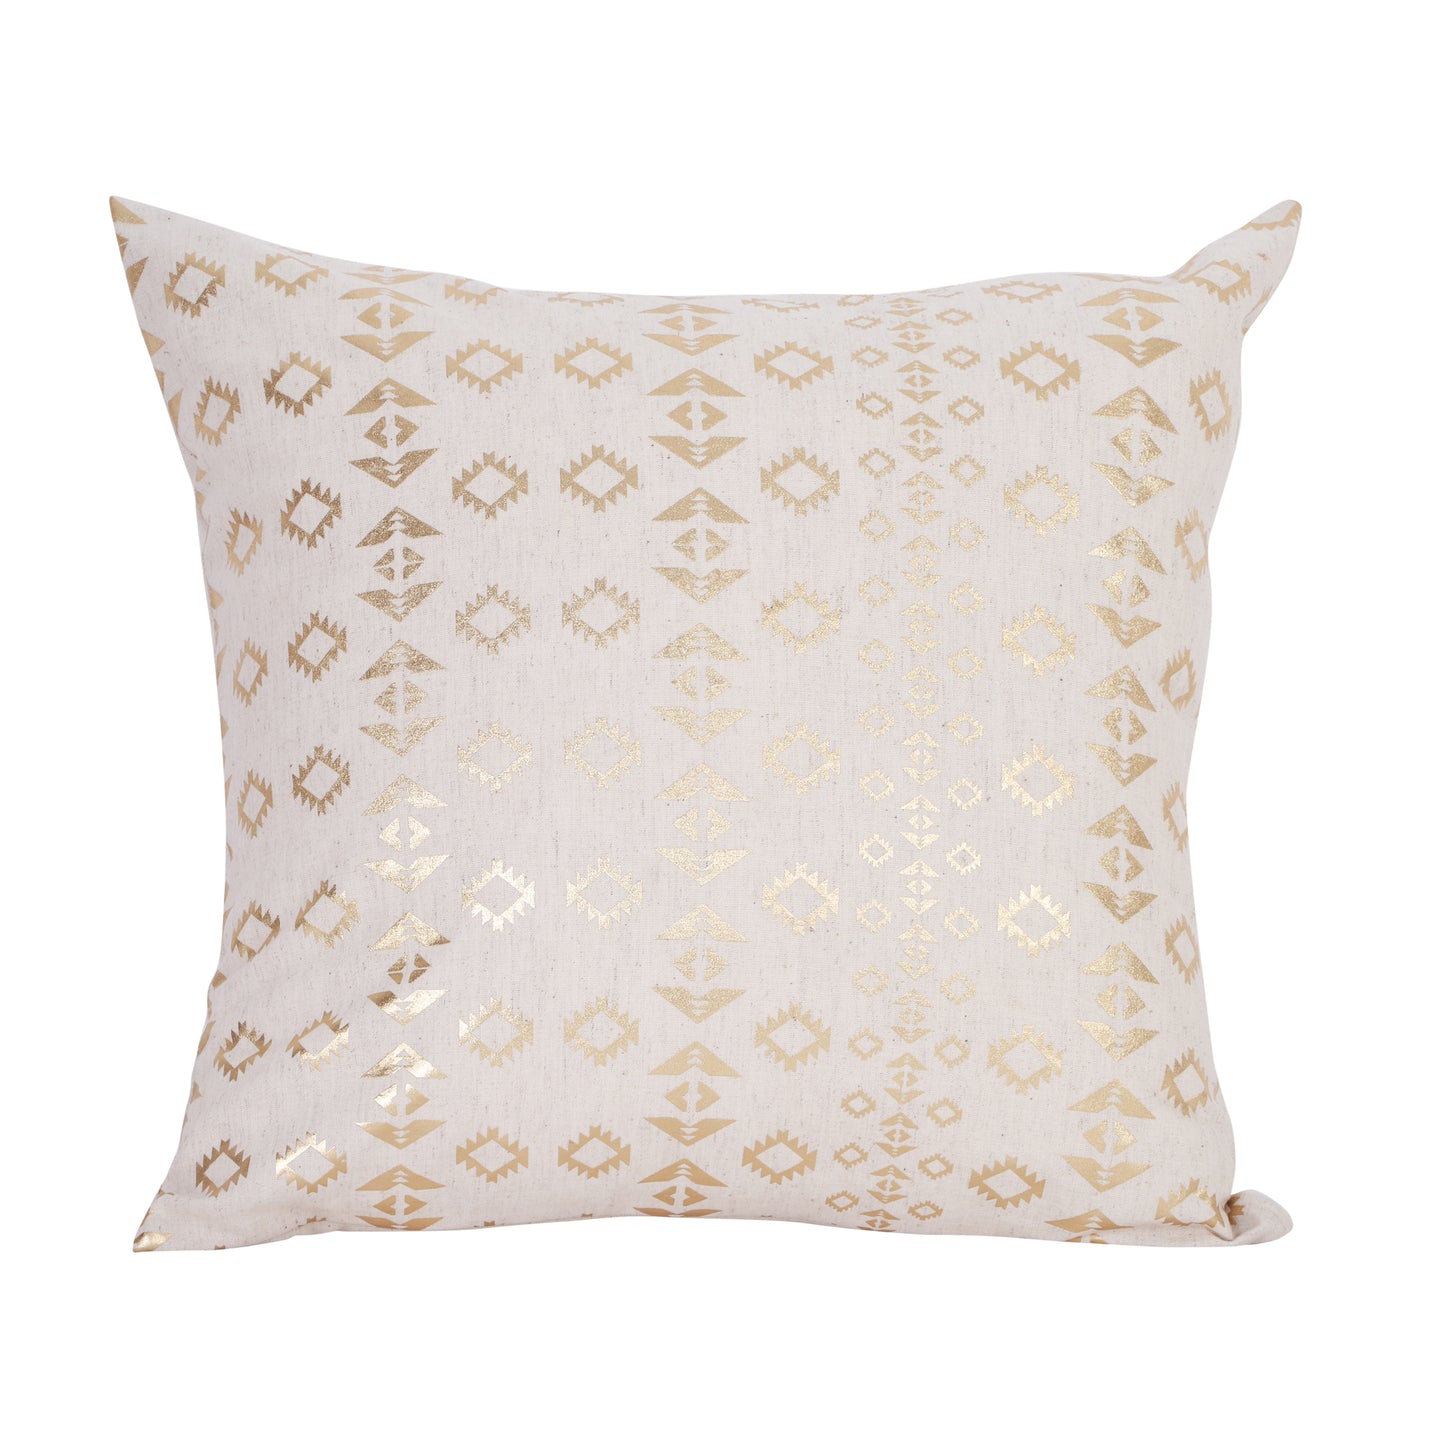 NUEVOSGHAR Cotton Printed Cushion Cover | Square Cushion Cover for Bedding/Sofa/Couch | Home Decorative Cushion Covers | Pack of 1 Piece | 18x18 Inch_Beige